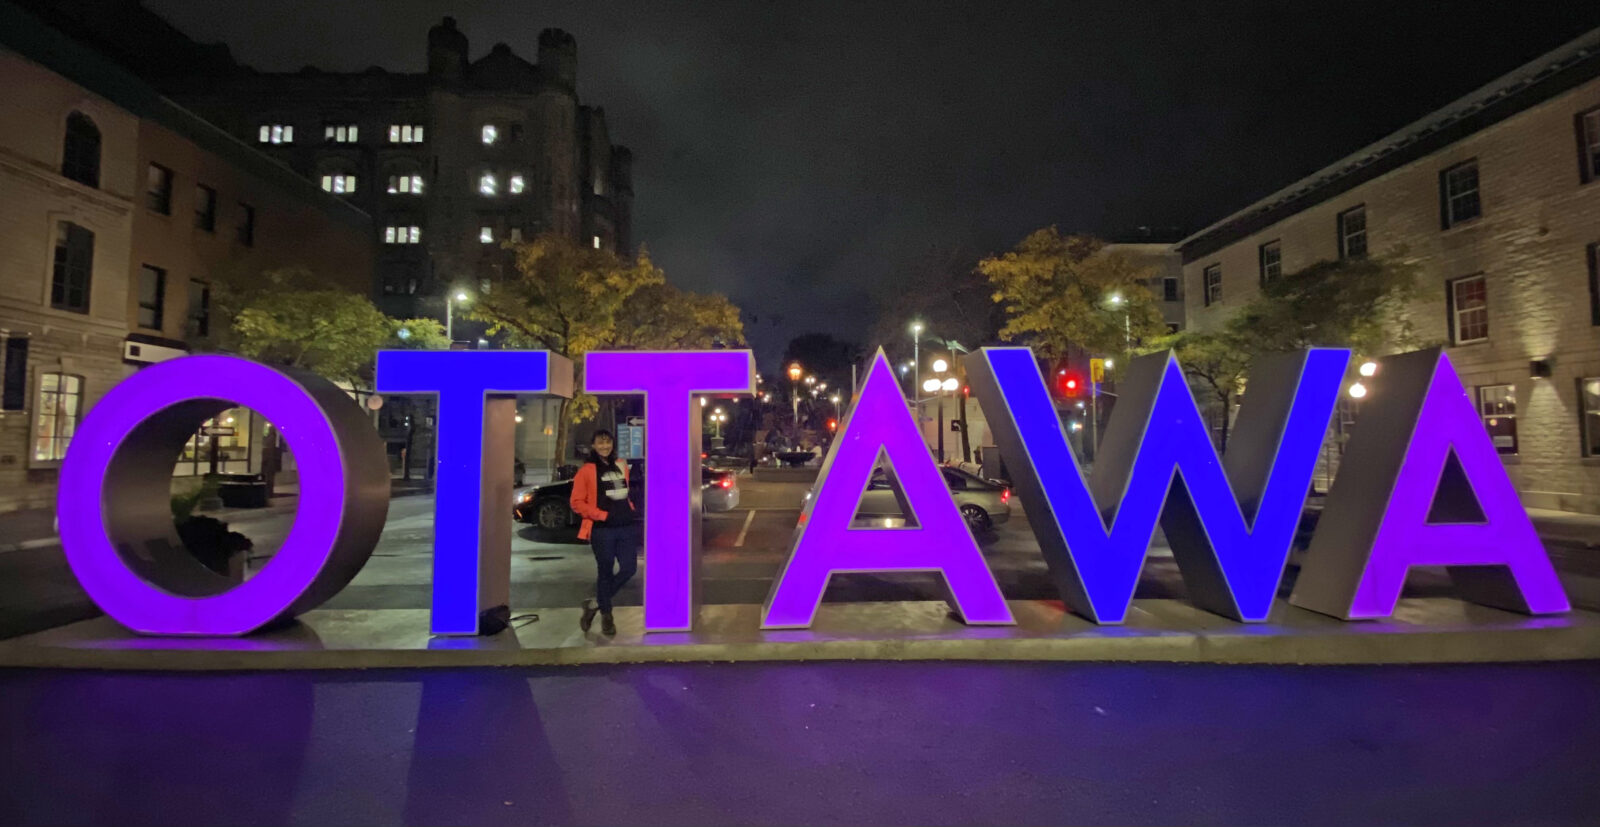 The Ottawa sign in Byward Market lit purple and blue.